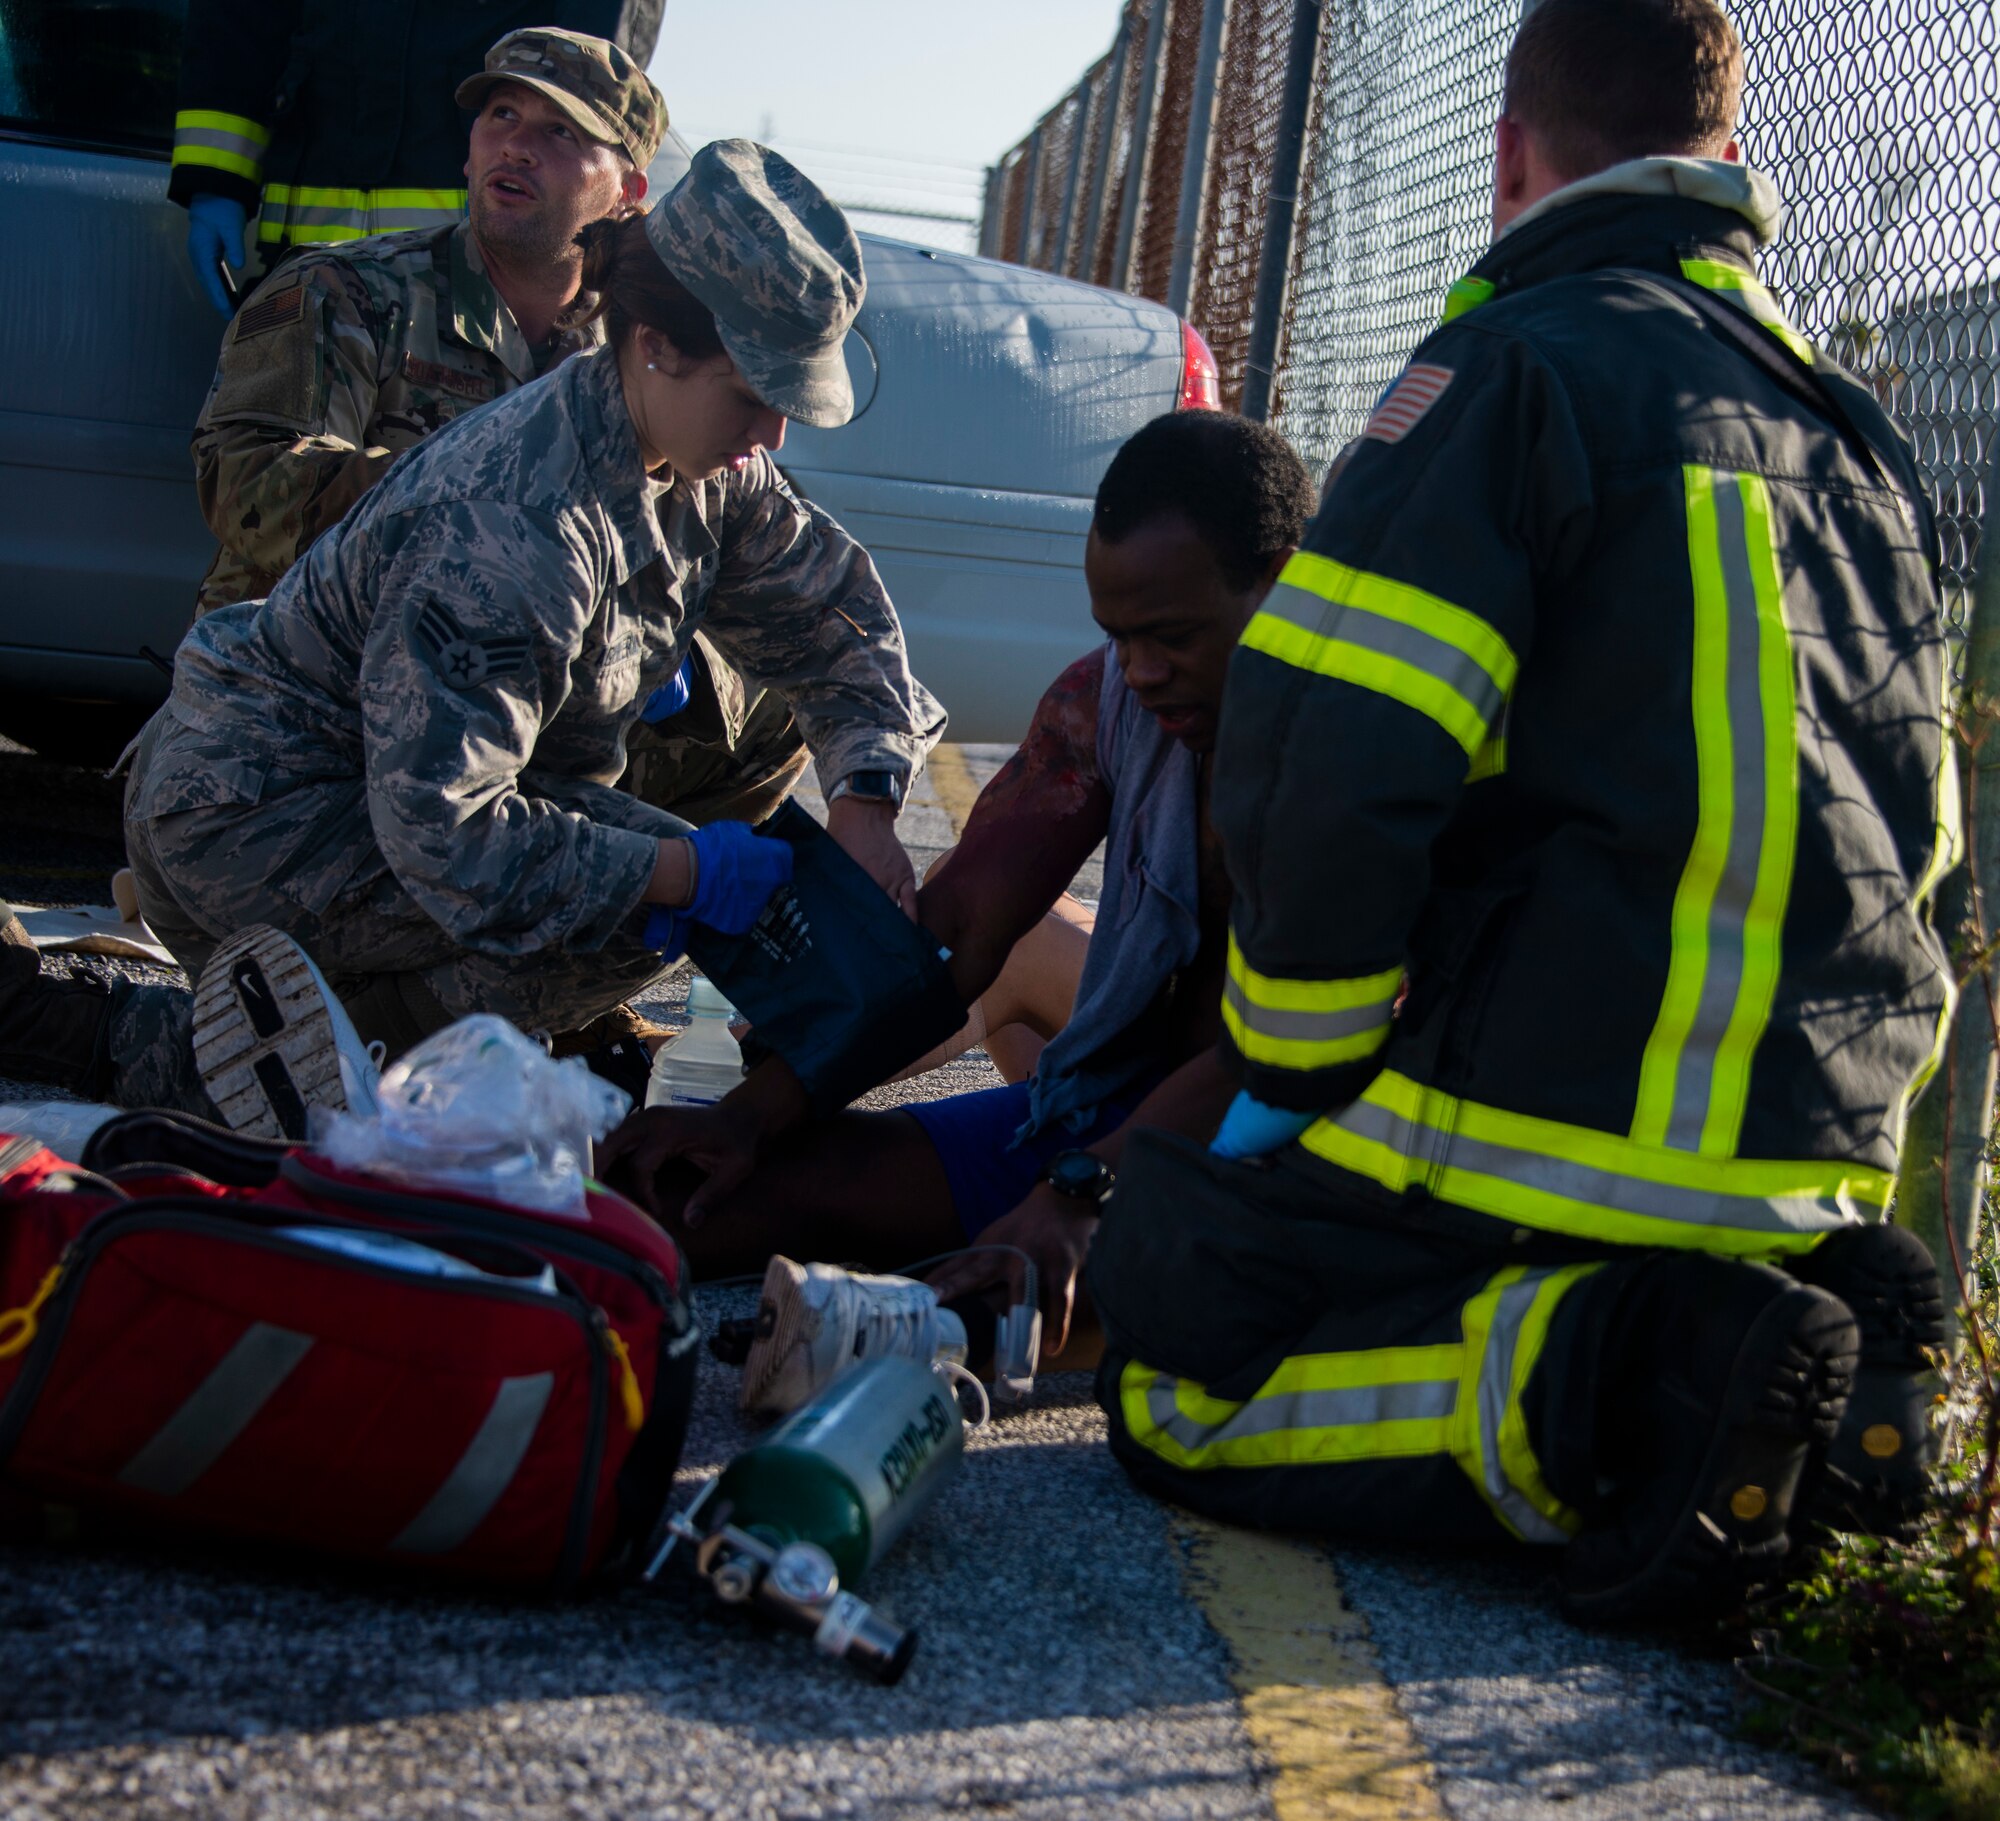 Senior Airman Ashley Deliz Aguilera, 325th Operational Medical Readiness Squadron Ambulance Services Department technician, left, applies emergency medical care to Staff Sgt. Zachary Collins, 325th OMRS ASD technician, center, a simulated patient, during an emergency response exercise at Tyndall Air Force Base, Florida, March 12, 2020. Staff Sgt. Jeffery Wells, 325th Civil Engineer Squadron fire department emergency medical technician, right, also administered medical treatment which is standard prior to patient transfer. (U.S. Air Force photo by 2nd Lt. Kayla Fitzgerald)